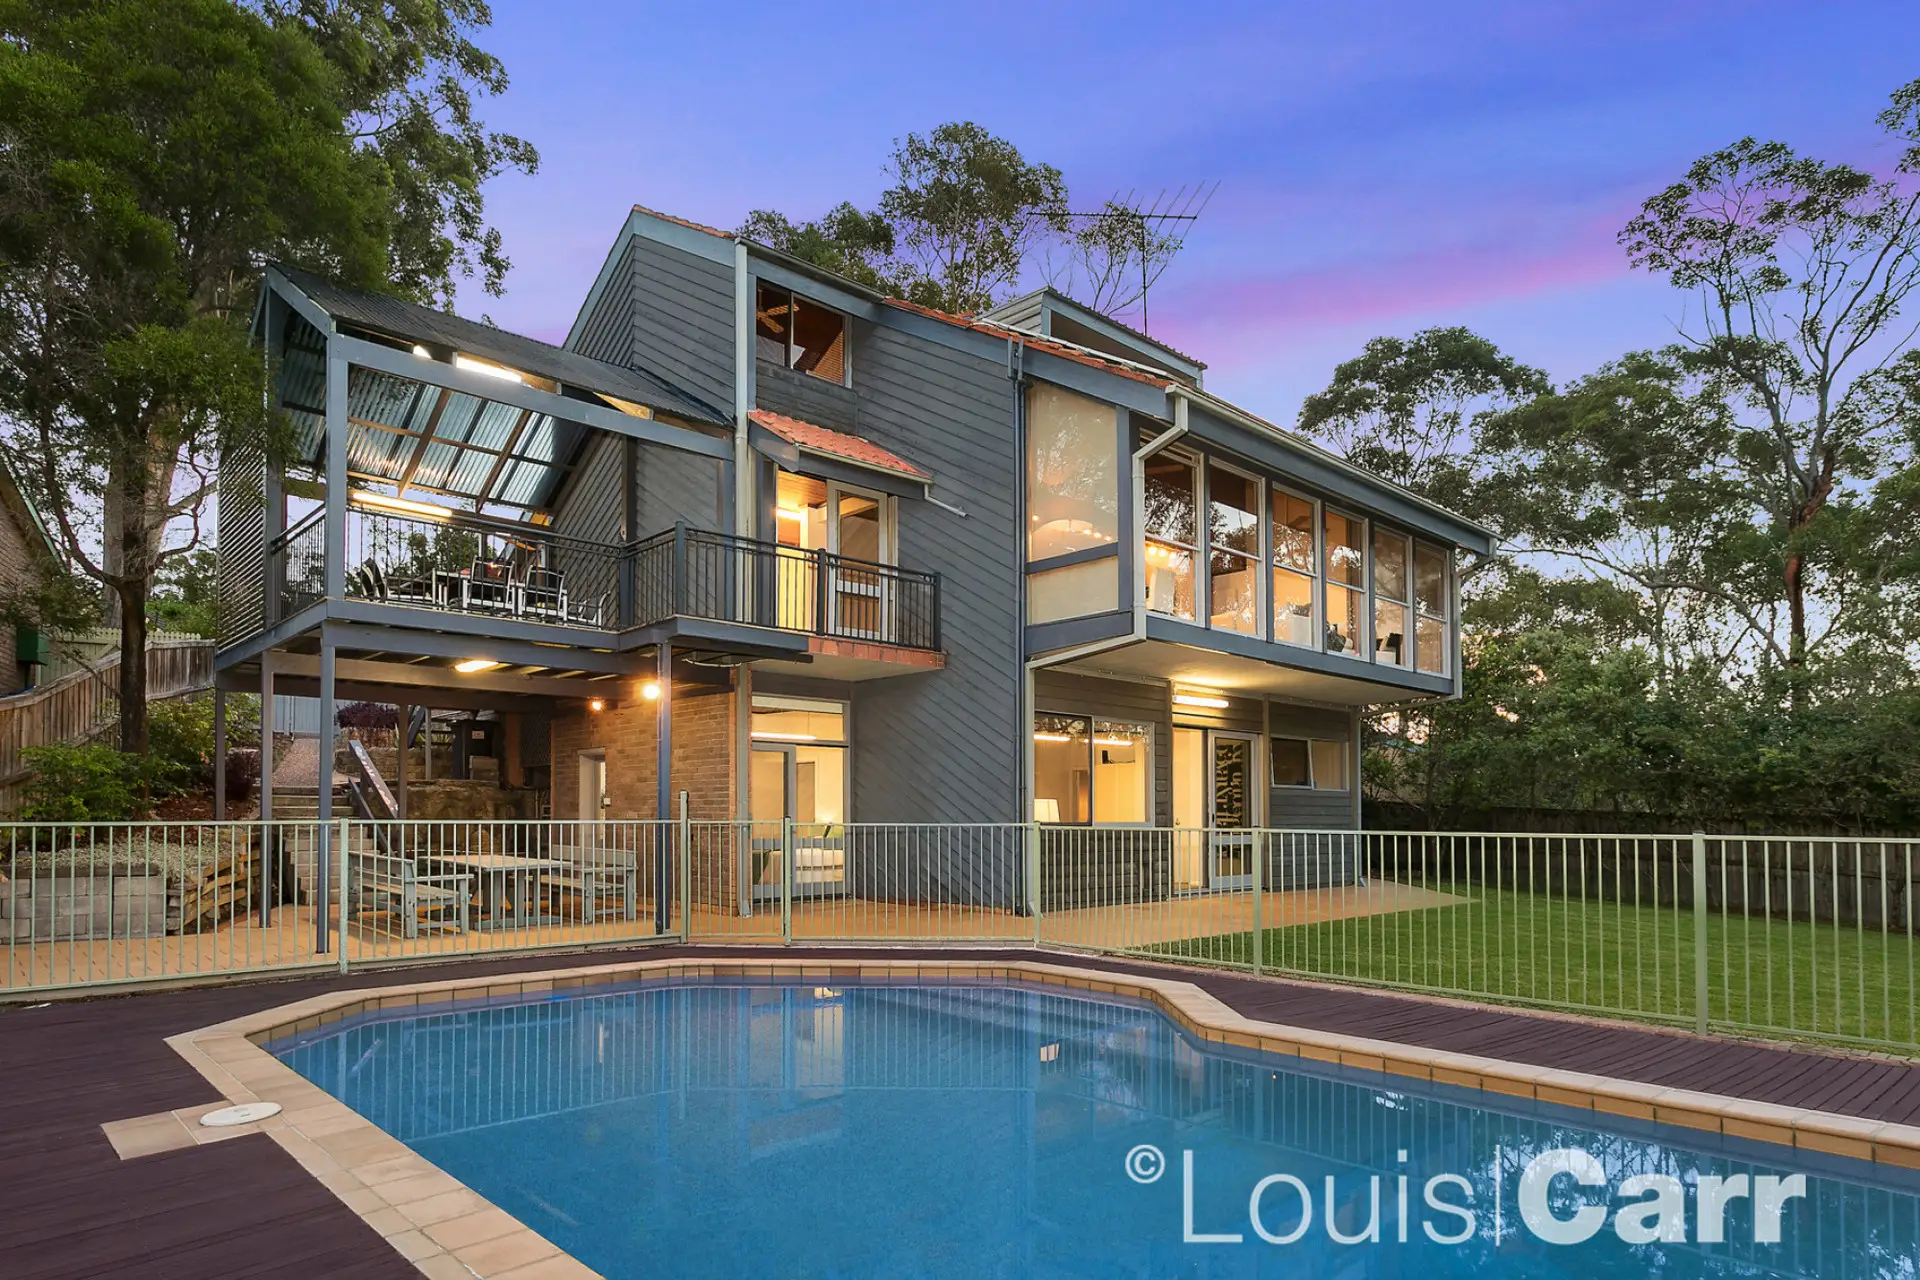 Photo #13: 8 Keith Court, Cherrybrook - Sold by Louis Carr Real Estate